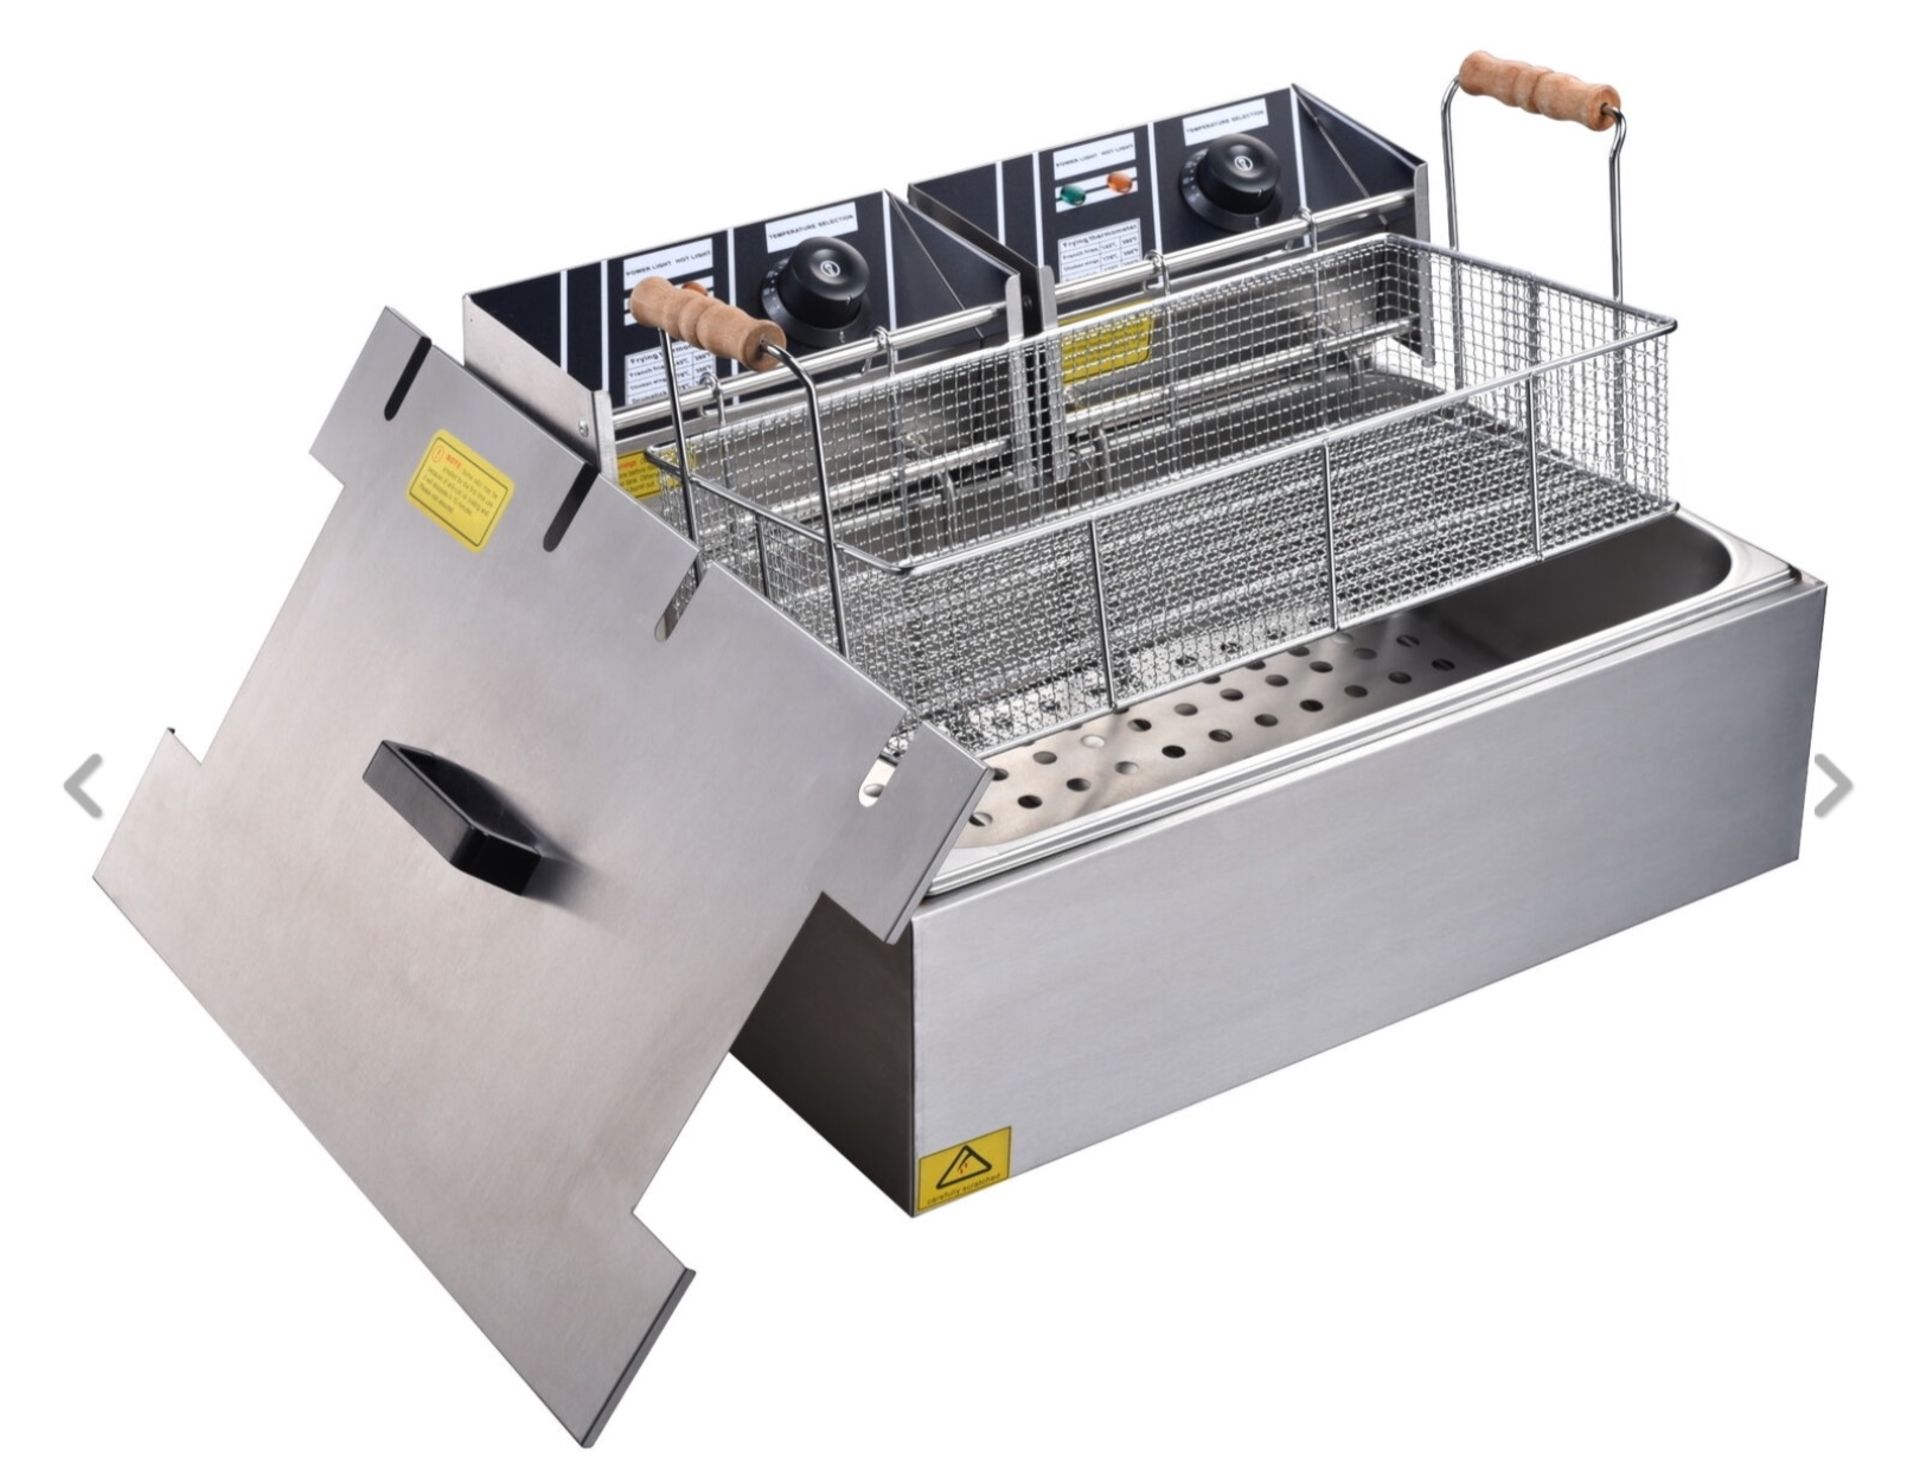 Brand New Commercial Large Deep Fat Fryer 20L - Image 2 of 2